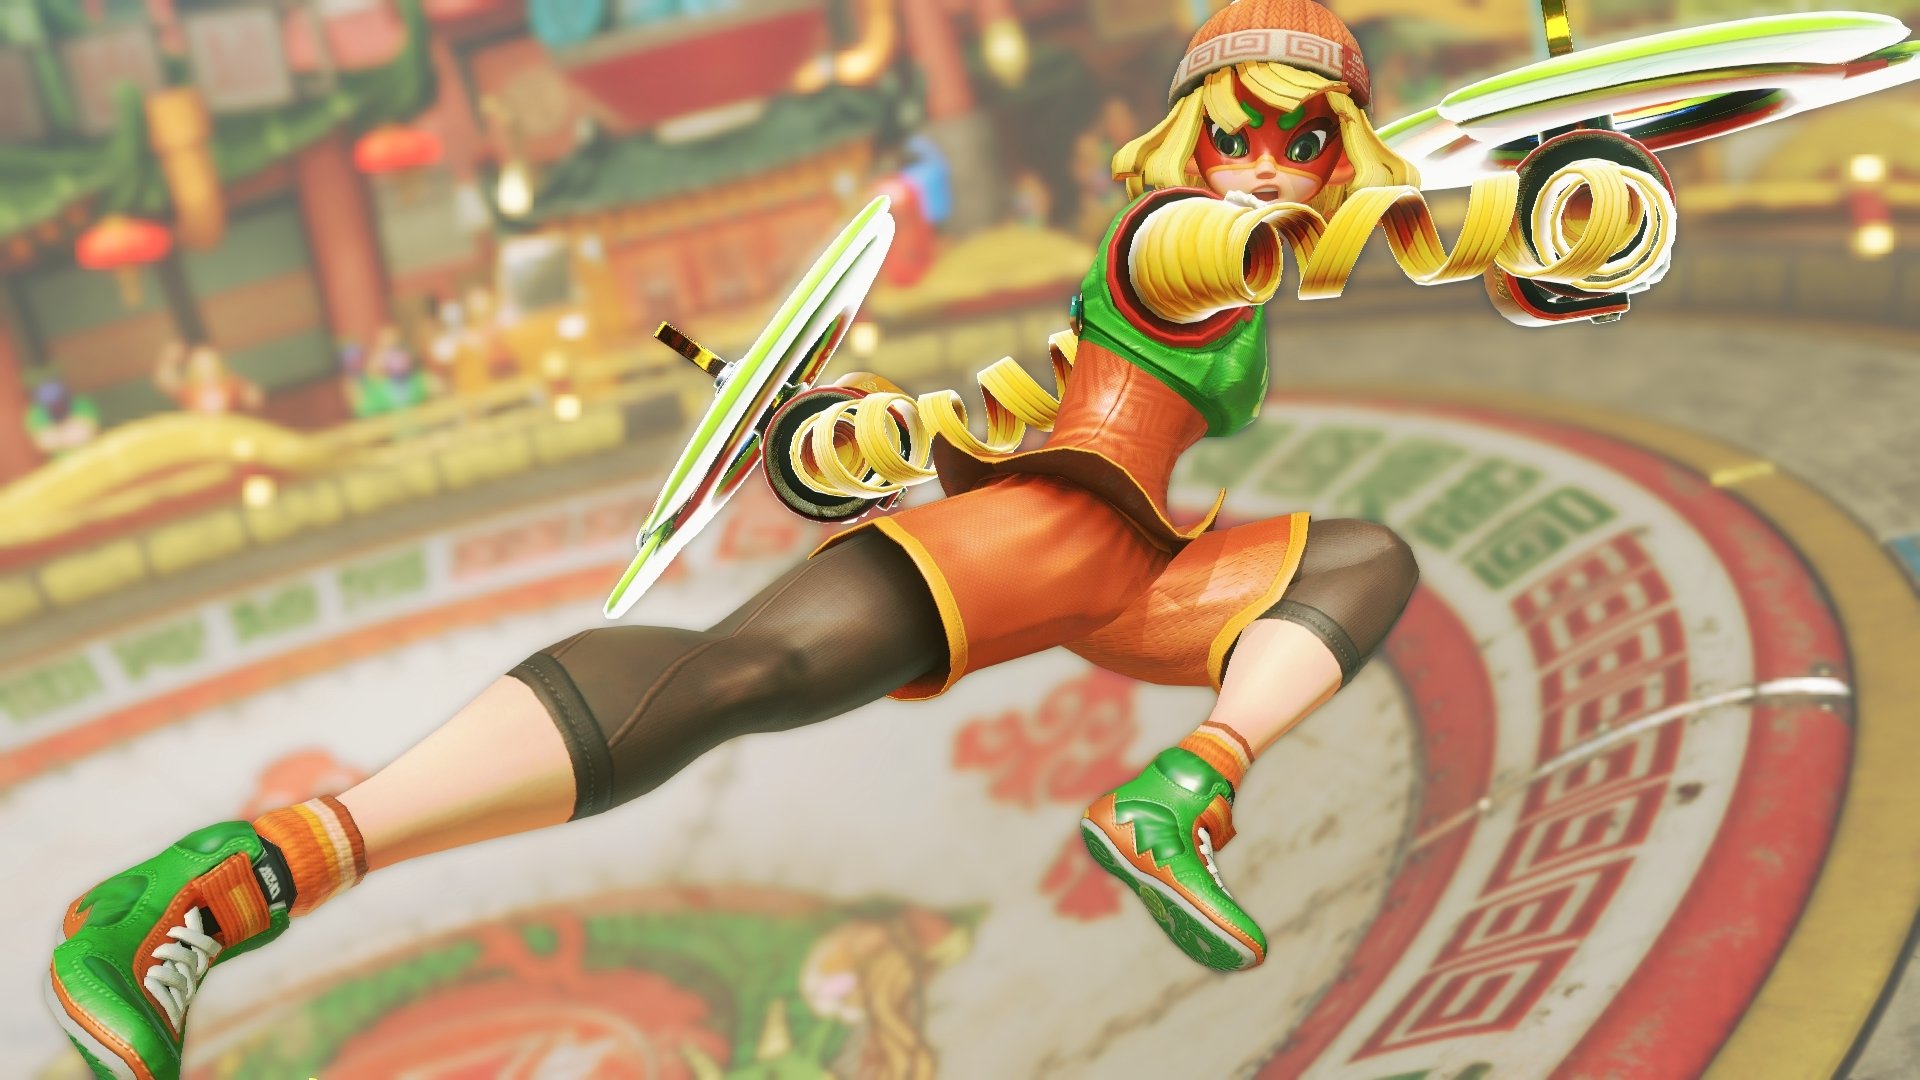 Arms HD Wallpaper Background Image Id